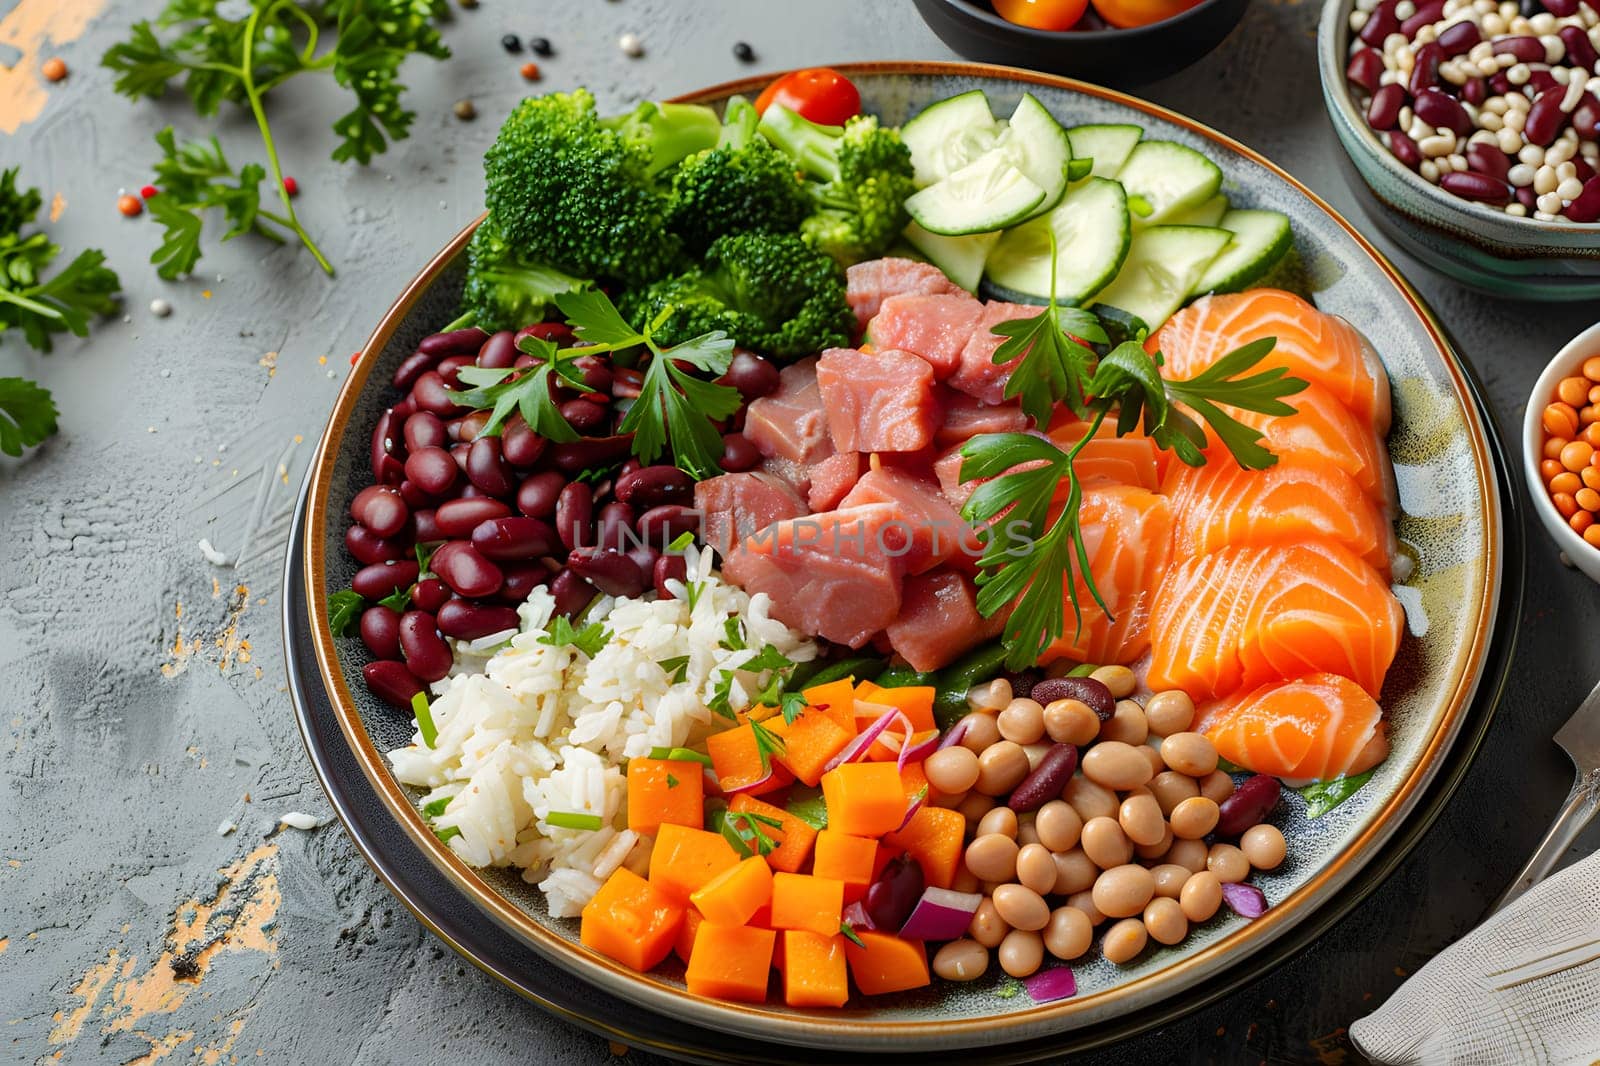 A delicious dish featuring salmon, beans, rice, and vegetables beautifully arranged on a plate atop a table